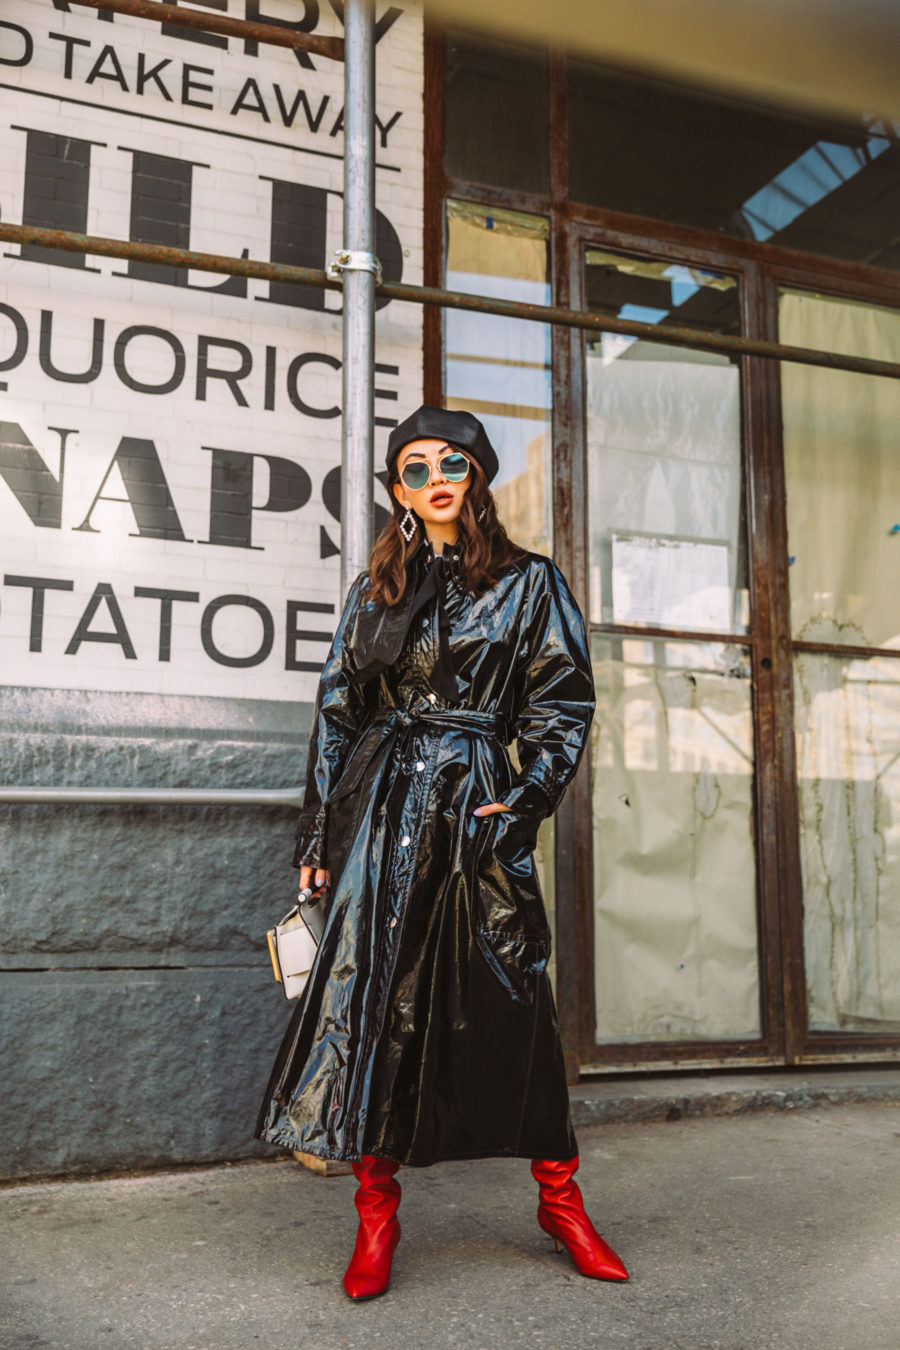 What to wear with knee high boots isabel marant vinyl trench coat, paul andrew boots, fendi sunglasses, boyy handbag, knee high boots, NYFW AW18 street style // Notjessfashion.com